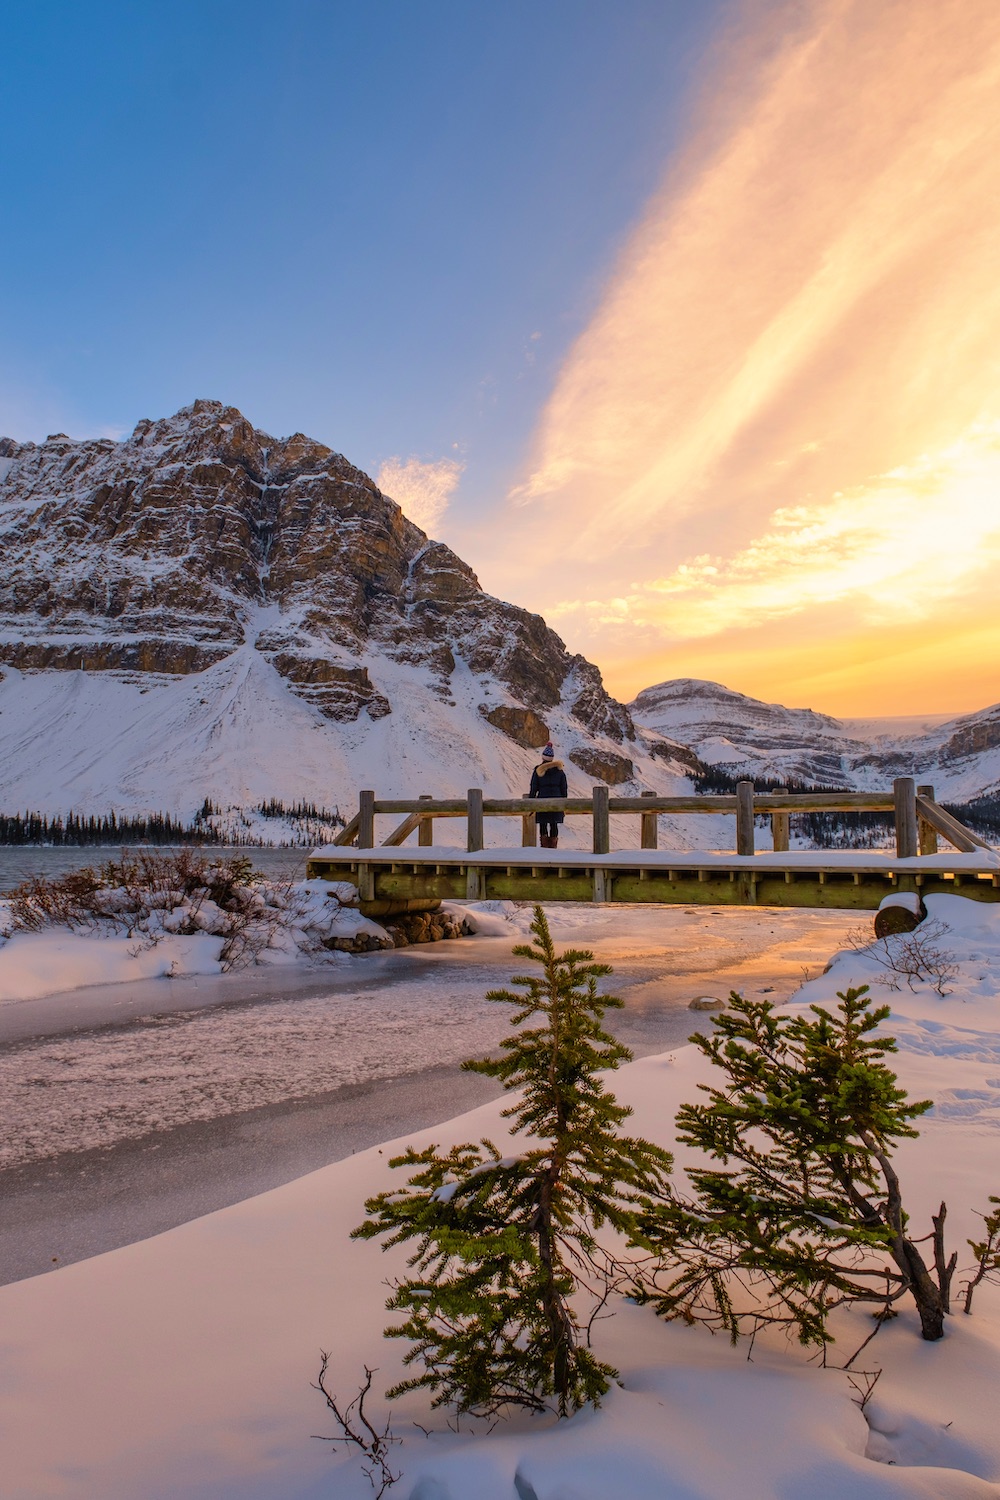 When is the Best Time To Visit Bow Lake?